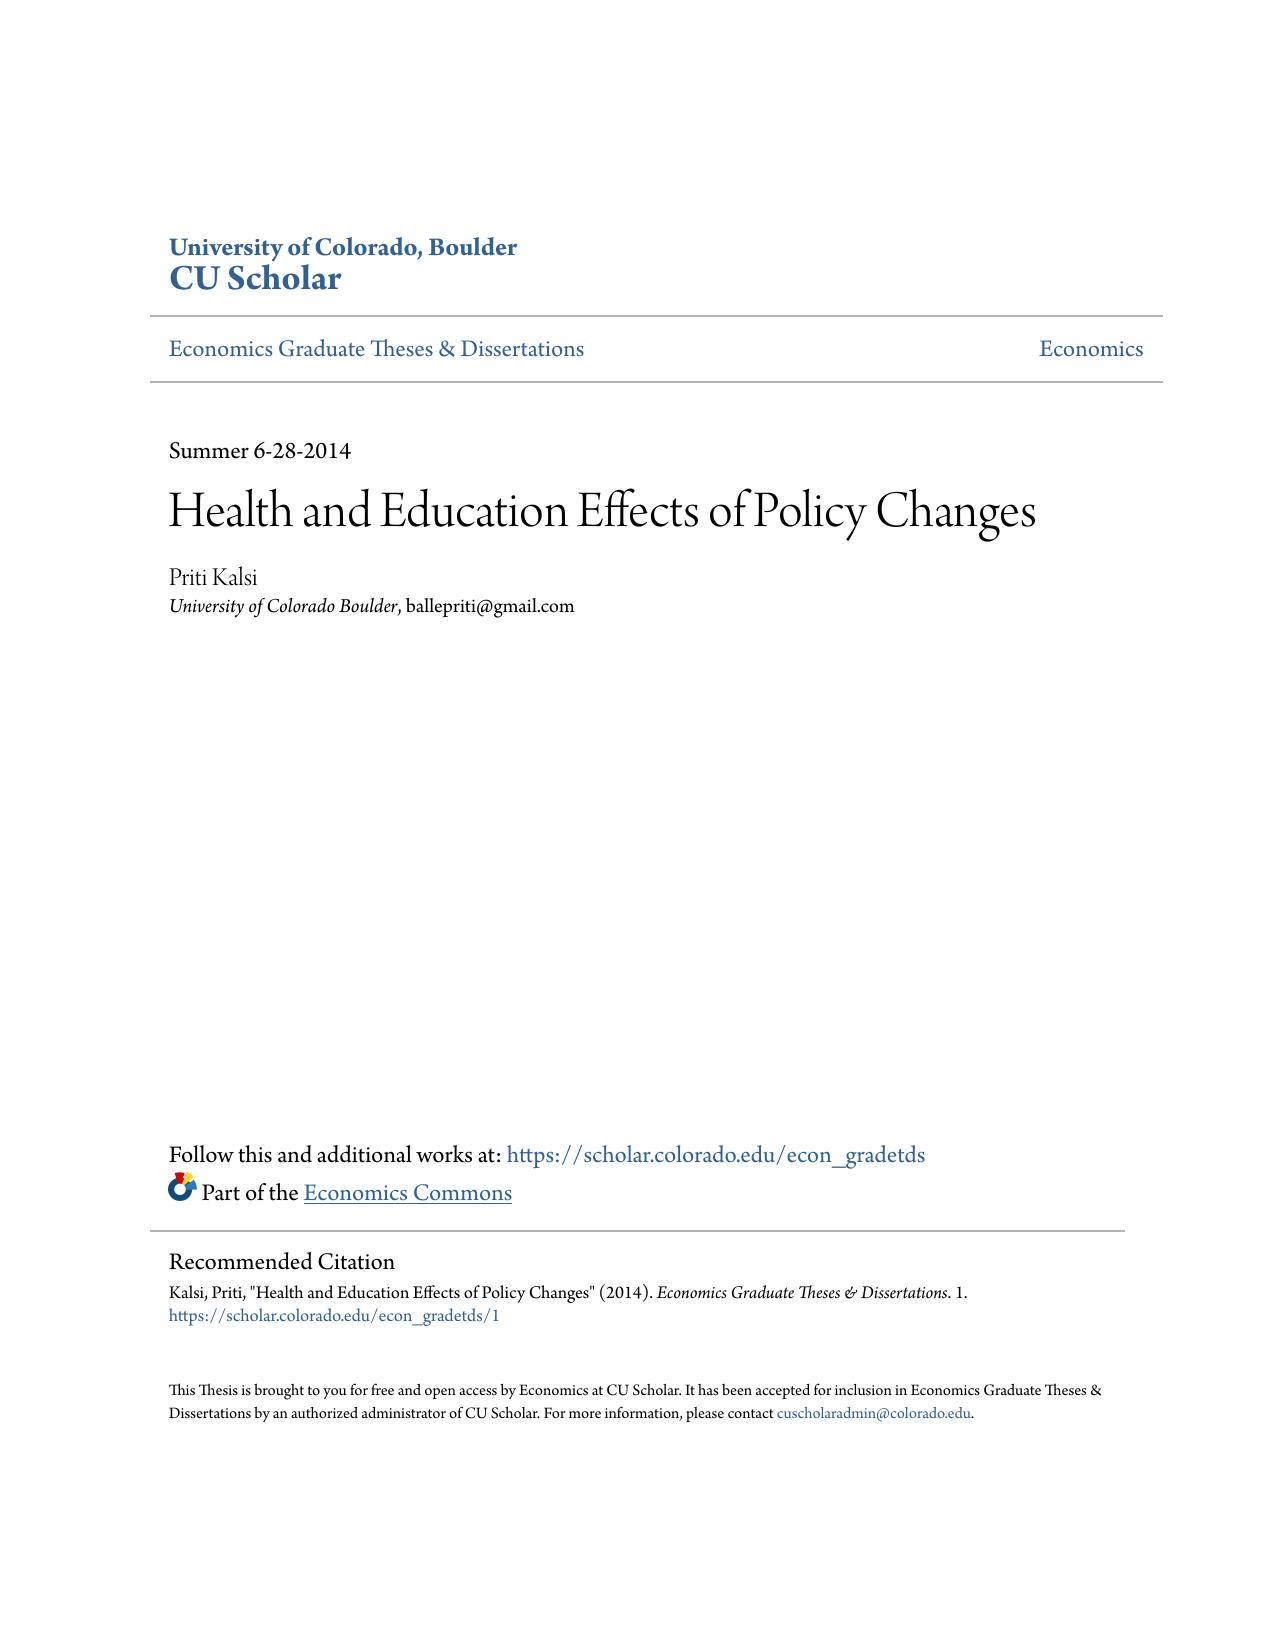 Health and Education E ffects of Policy Changes